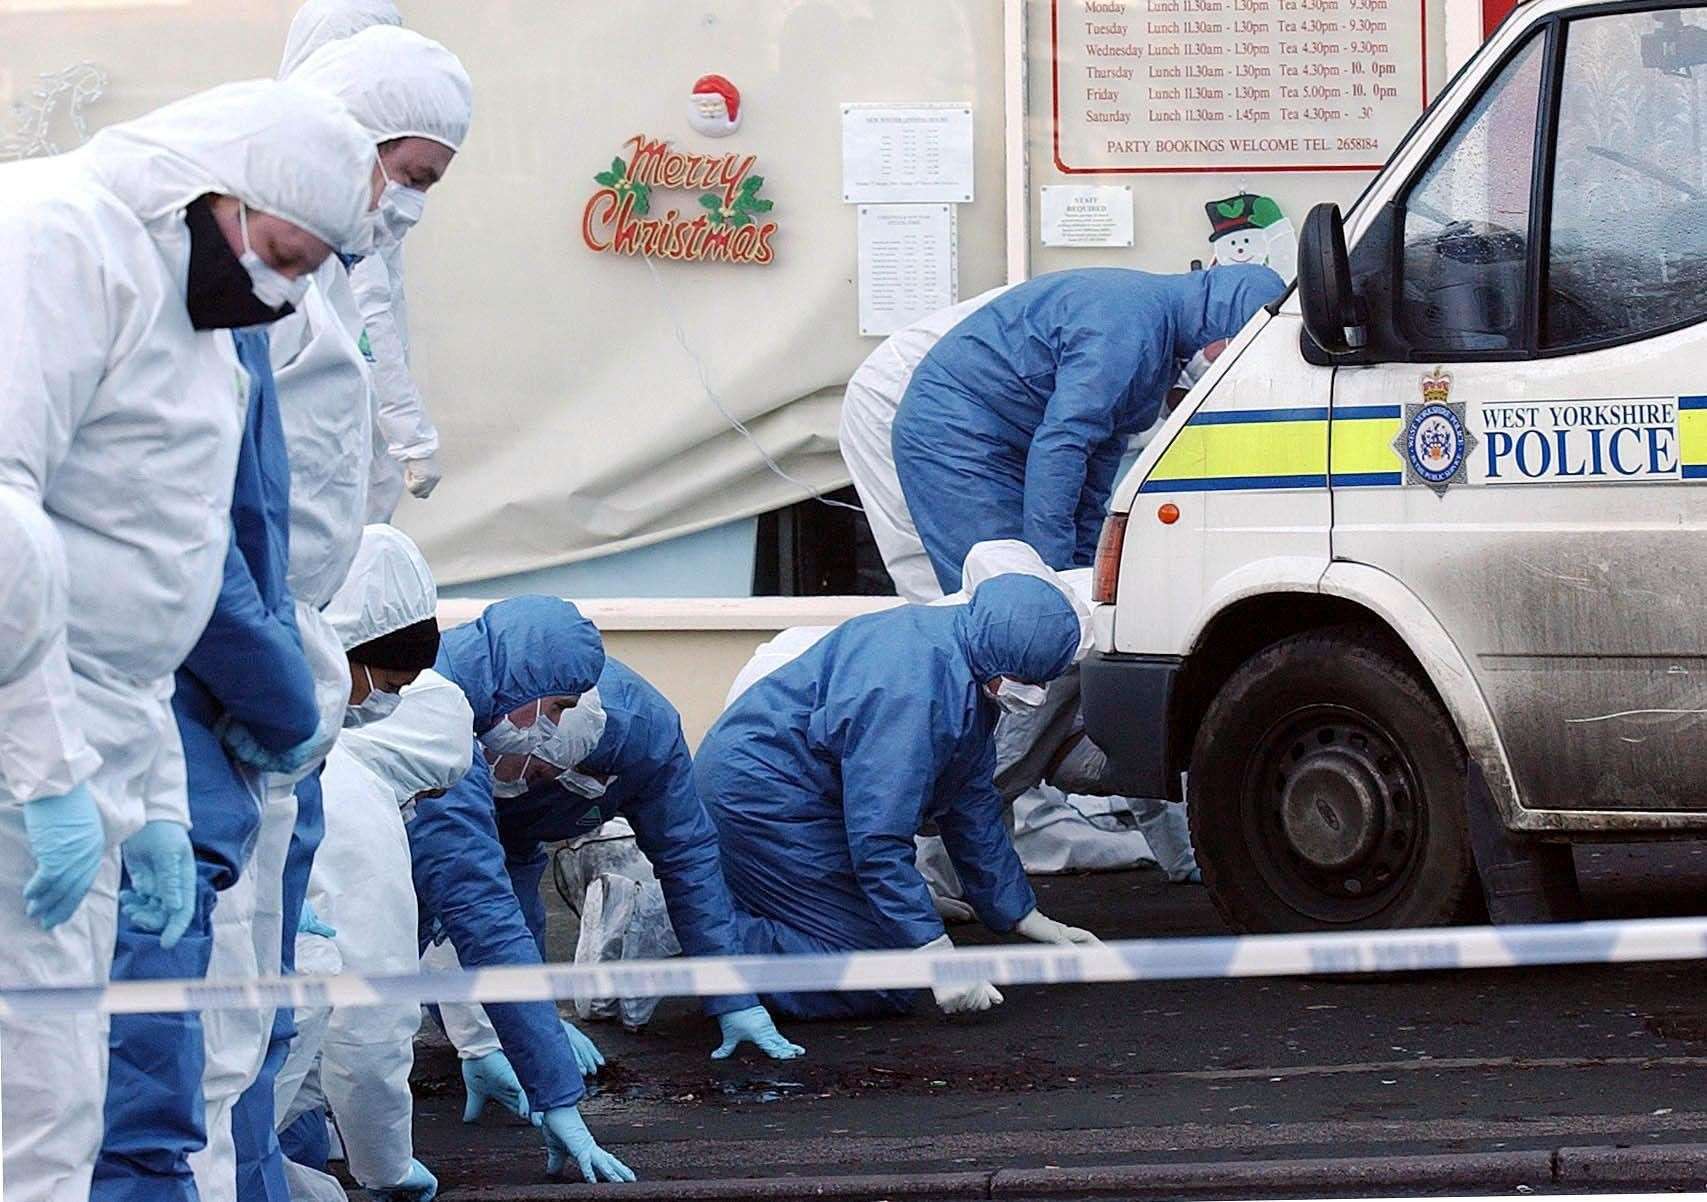 Forensic officers search the scene after the 2003 murder in Dib Lane, Leeds (John Giles/PA)